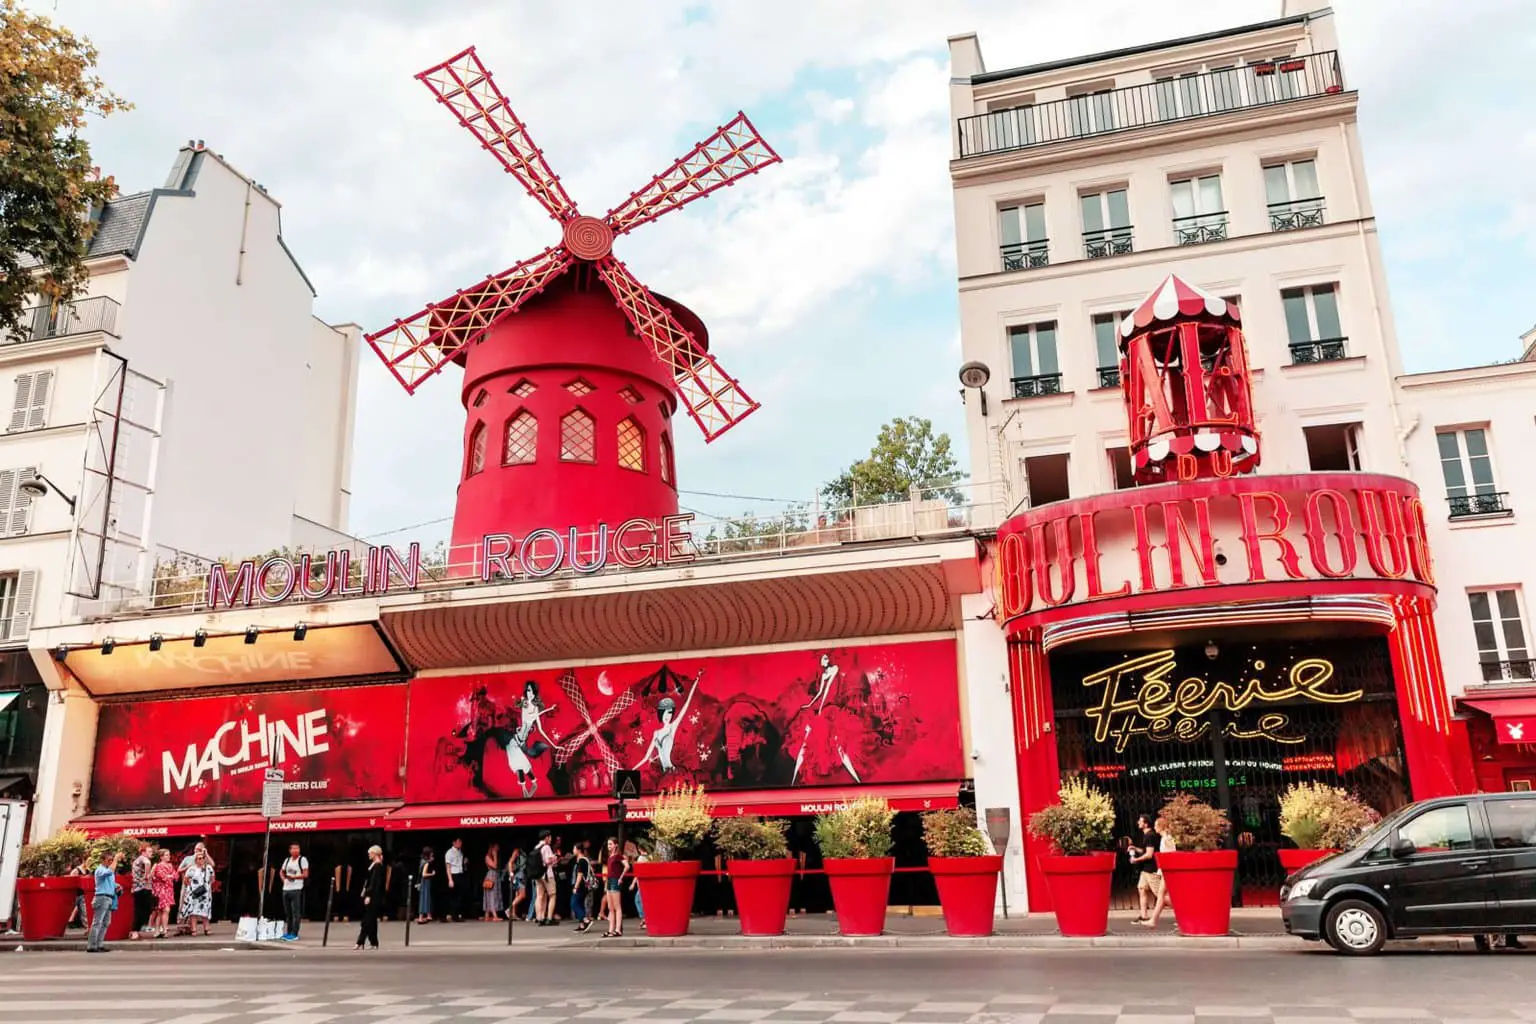 The famous Moulin Rouge